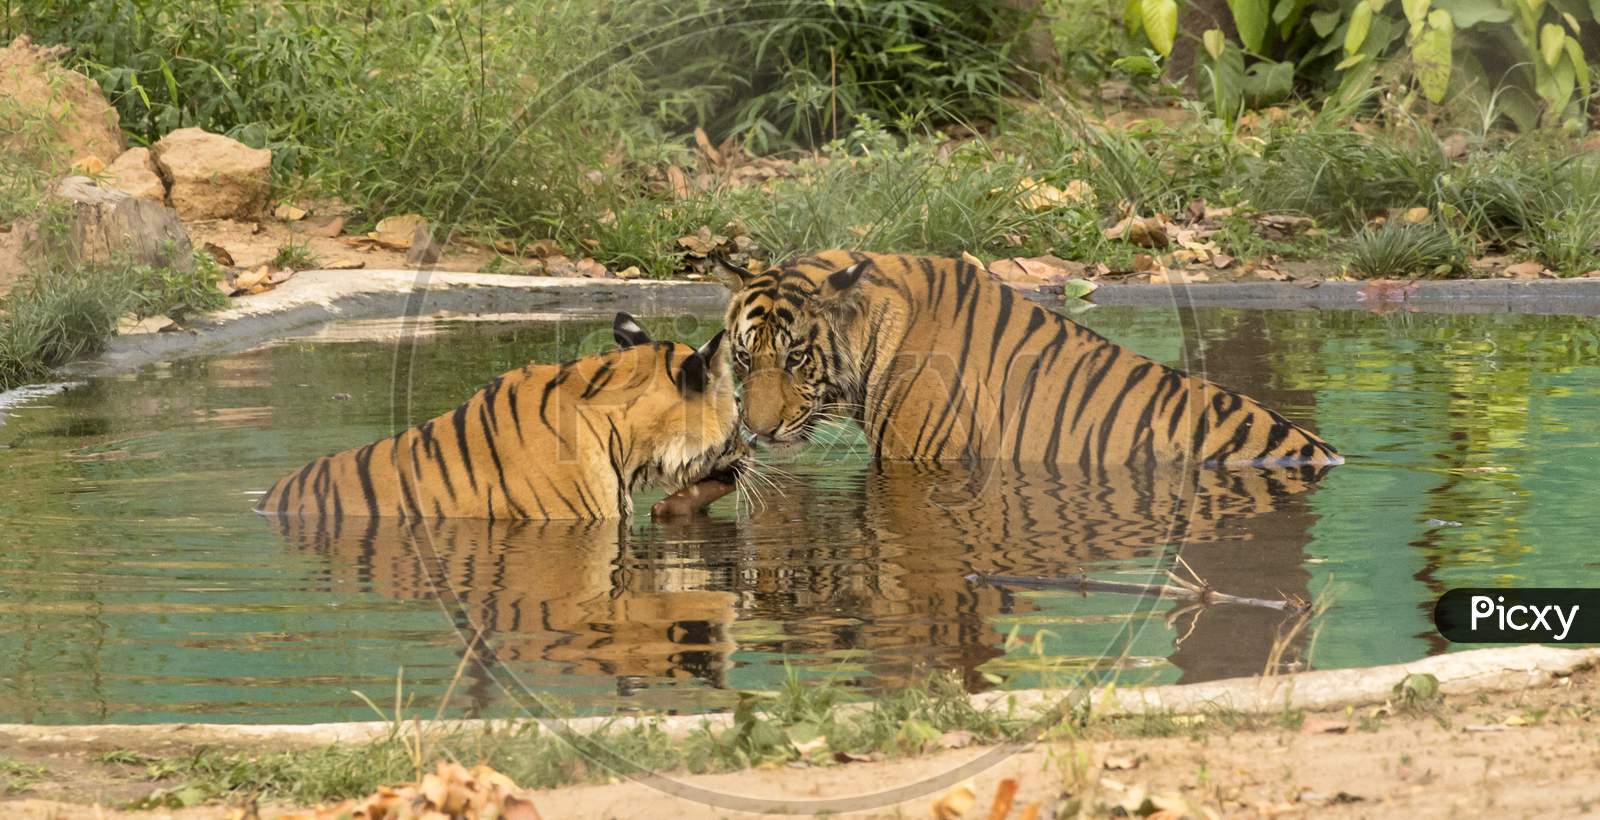 A couple of Tigers or Bengal Tigers in Water